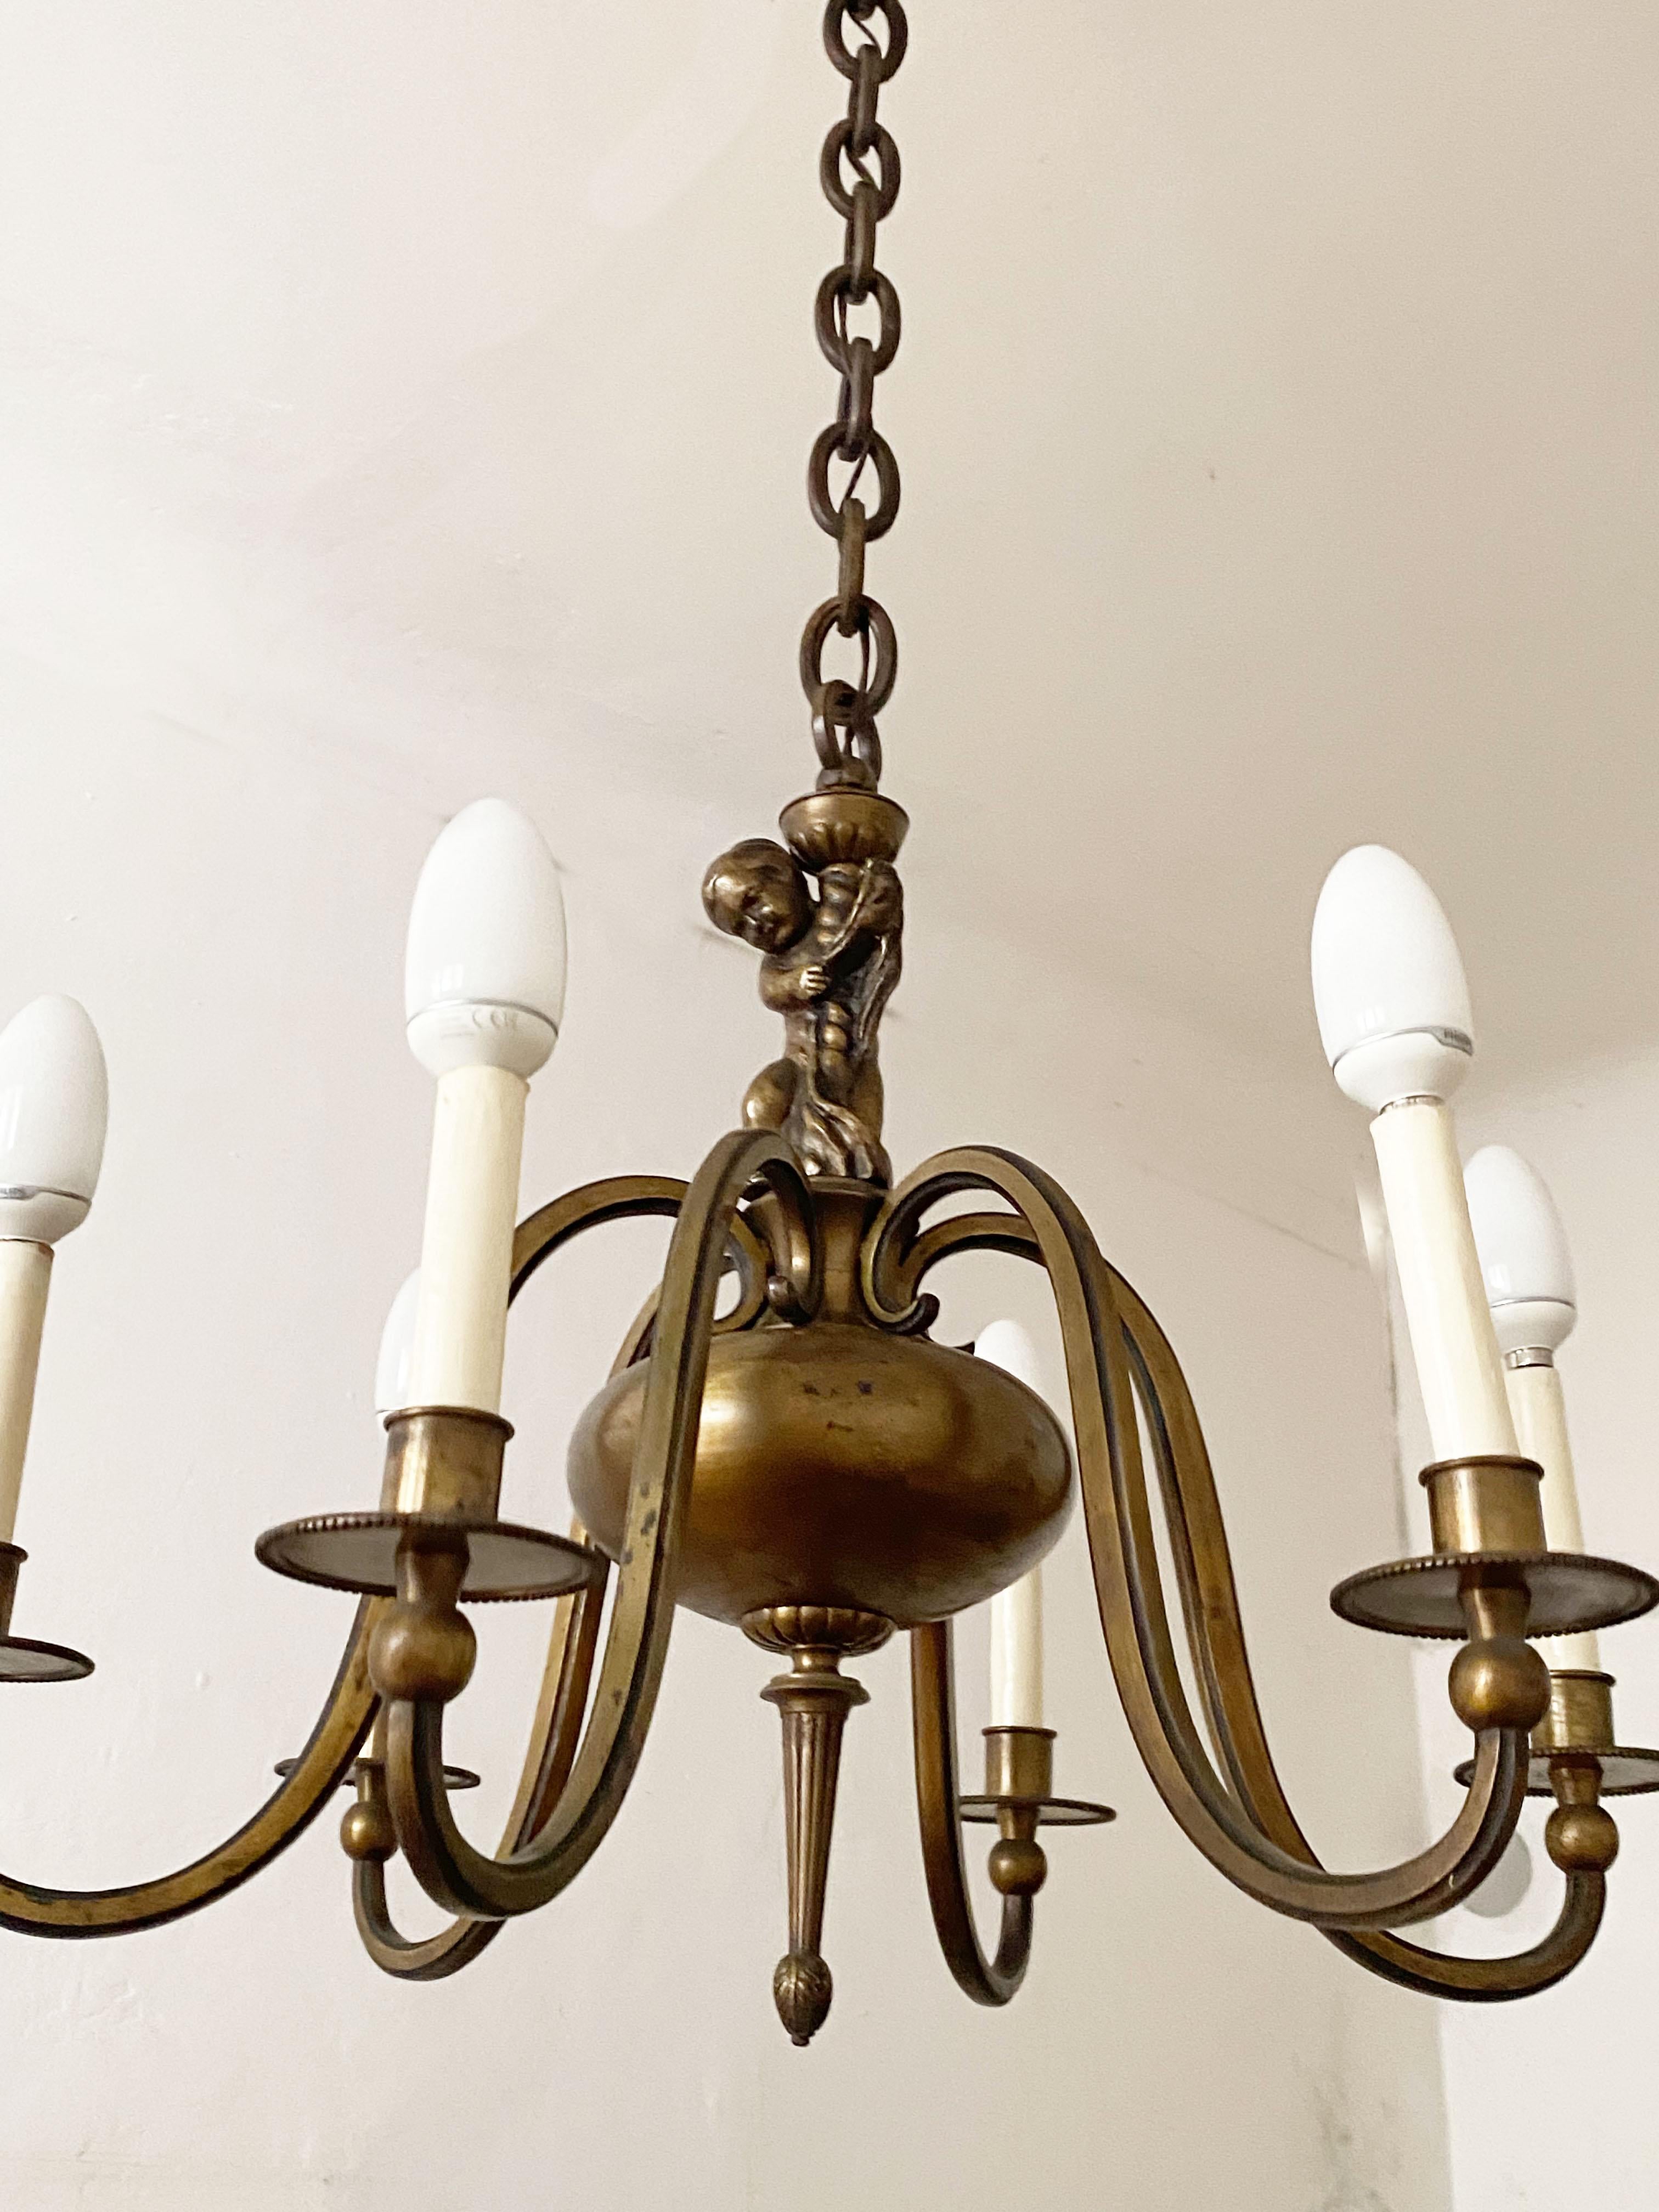 Brass chandelier made in the 1880s in Vienna.
A beautiful form body. Six flamed fitted with E14 sockets and an baroque cherub in the middle.
Original condition.